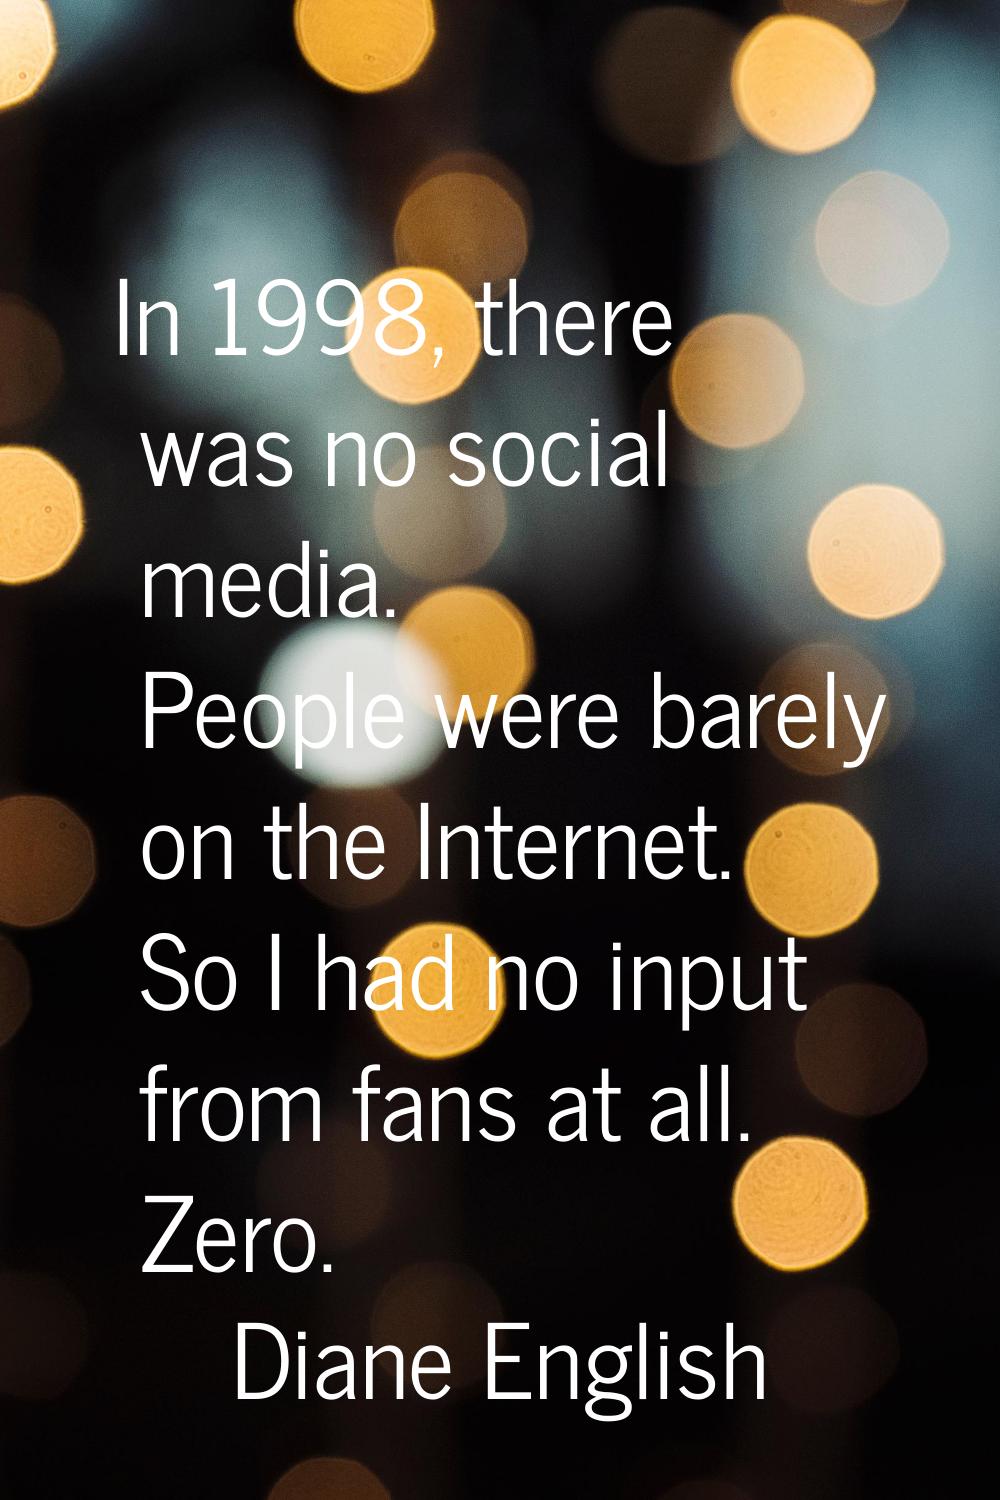 In 1998, there was no social media. People were barely on the Internet. So I had no input from fans